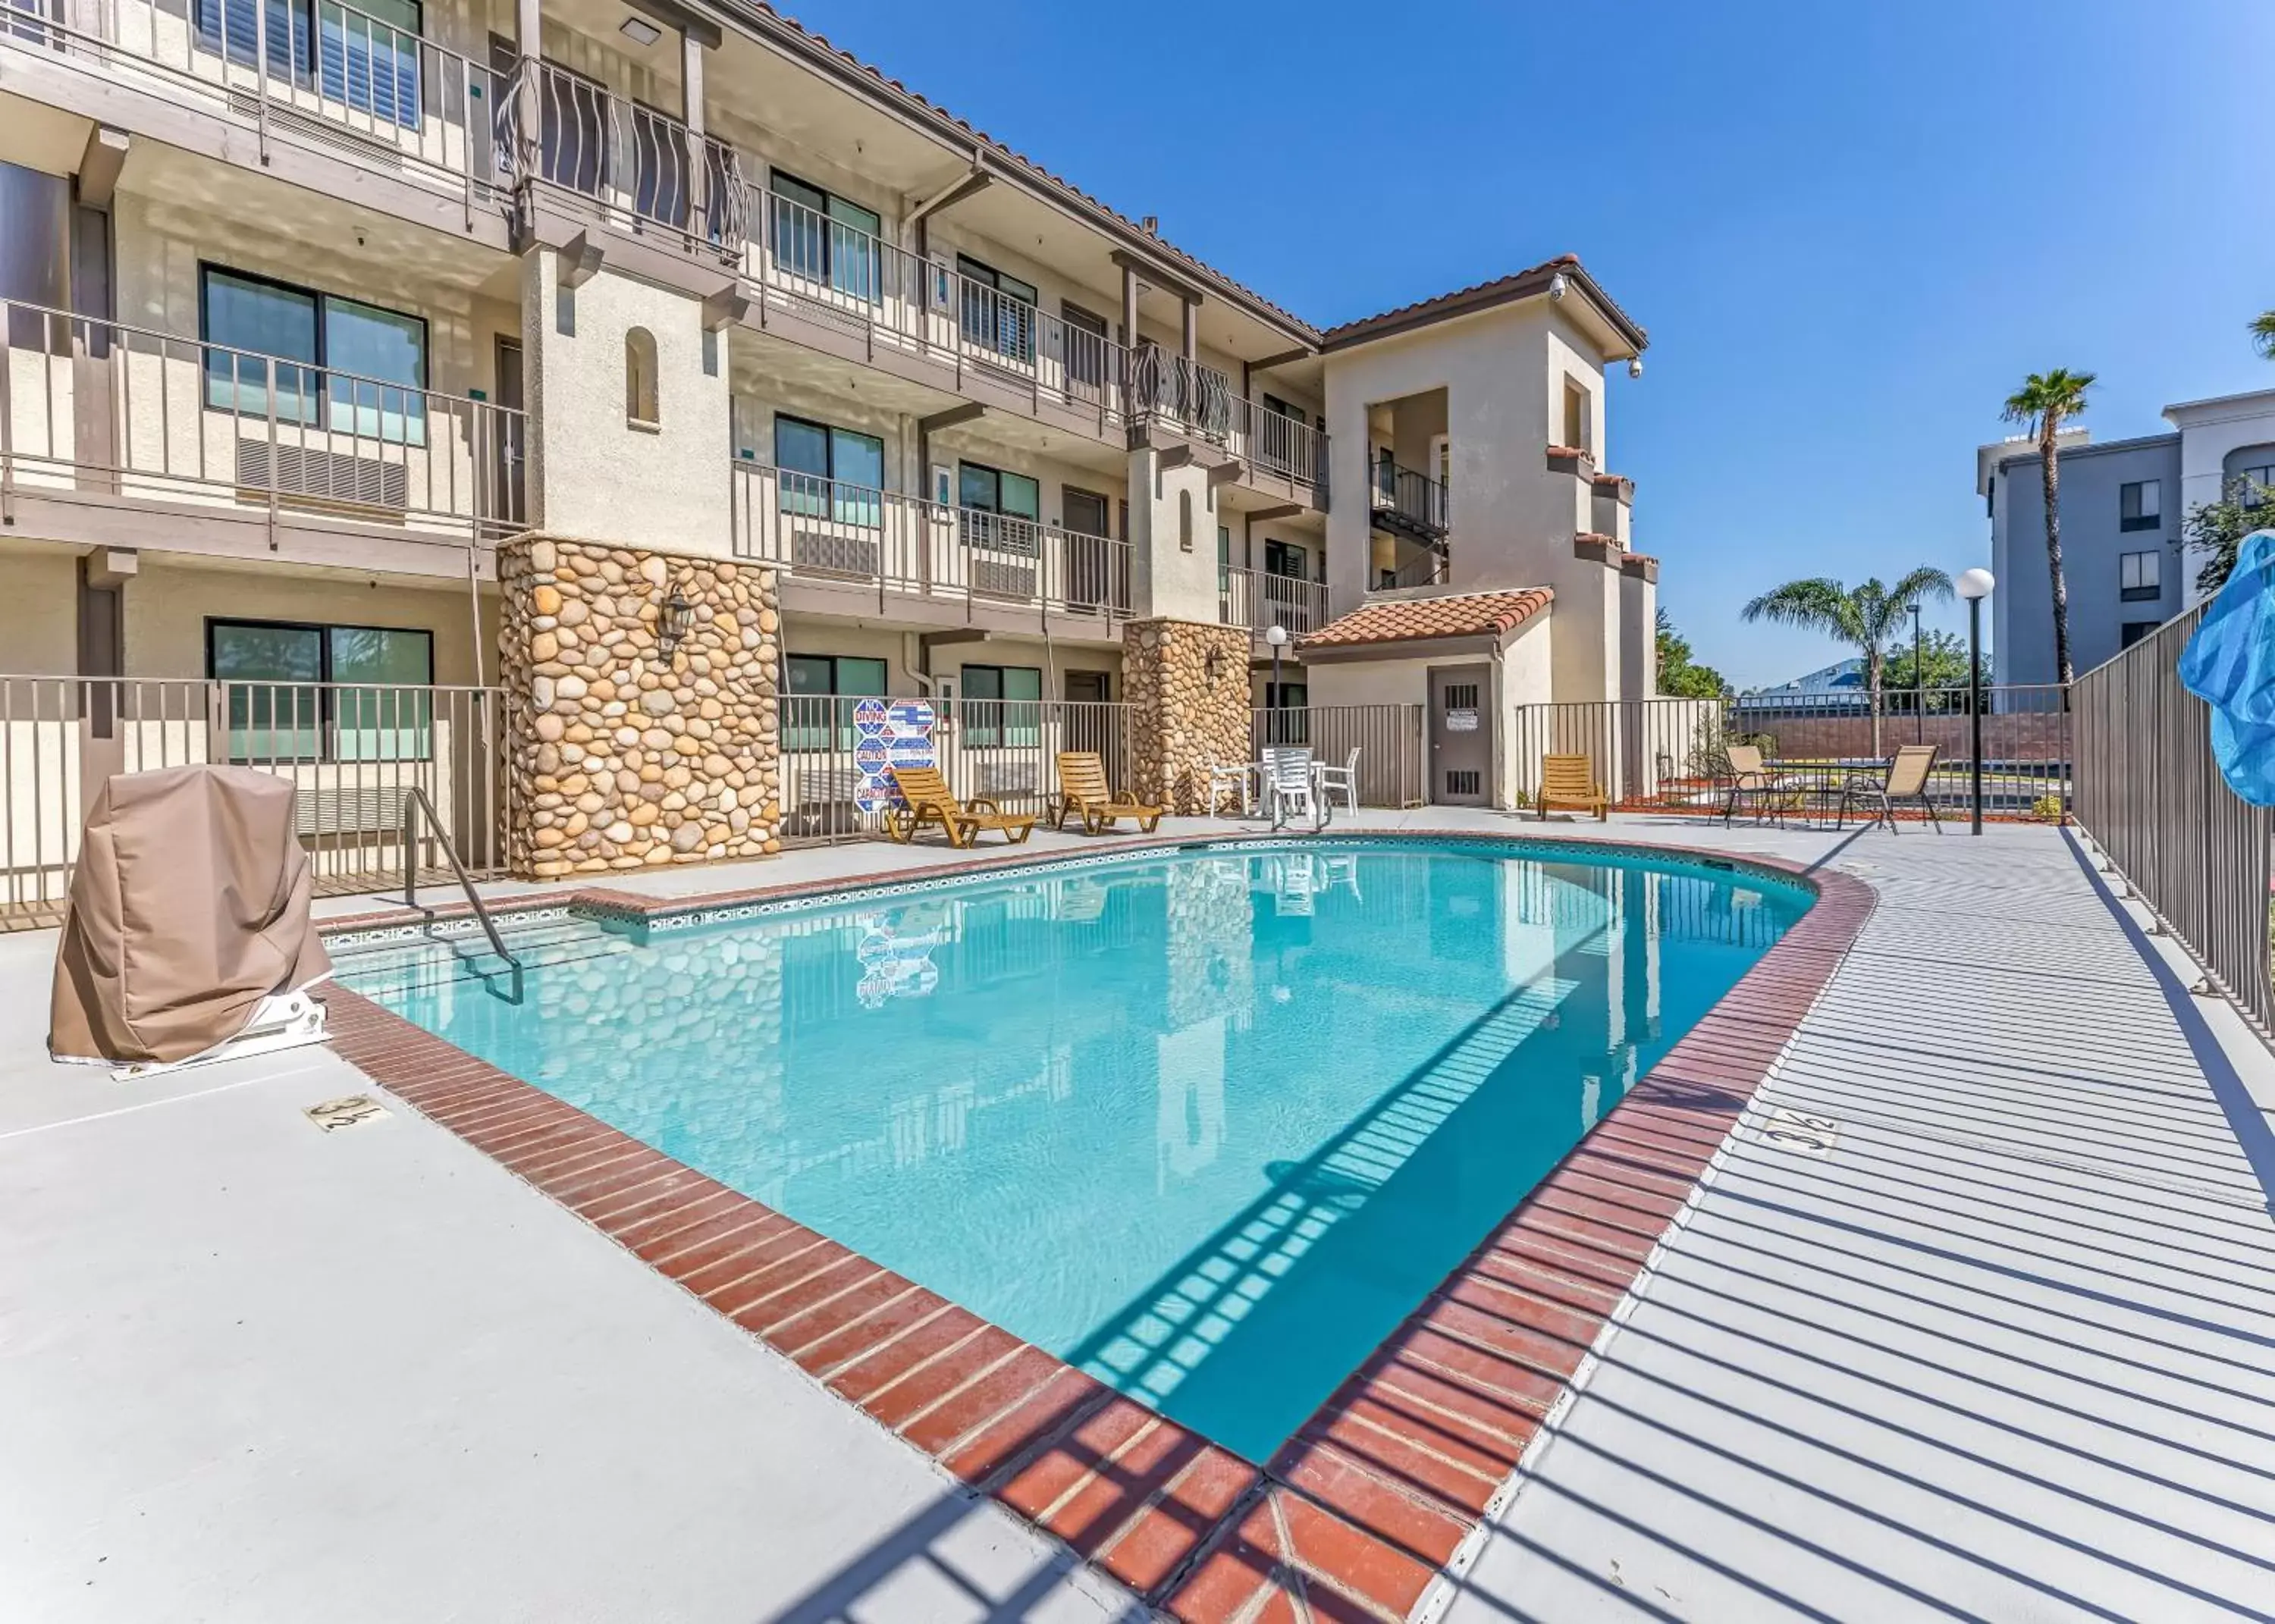 Swimming Pool in Hillstone Inn Tulare, Ascend Hotel Collection